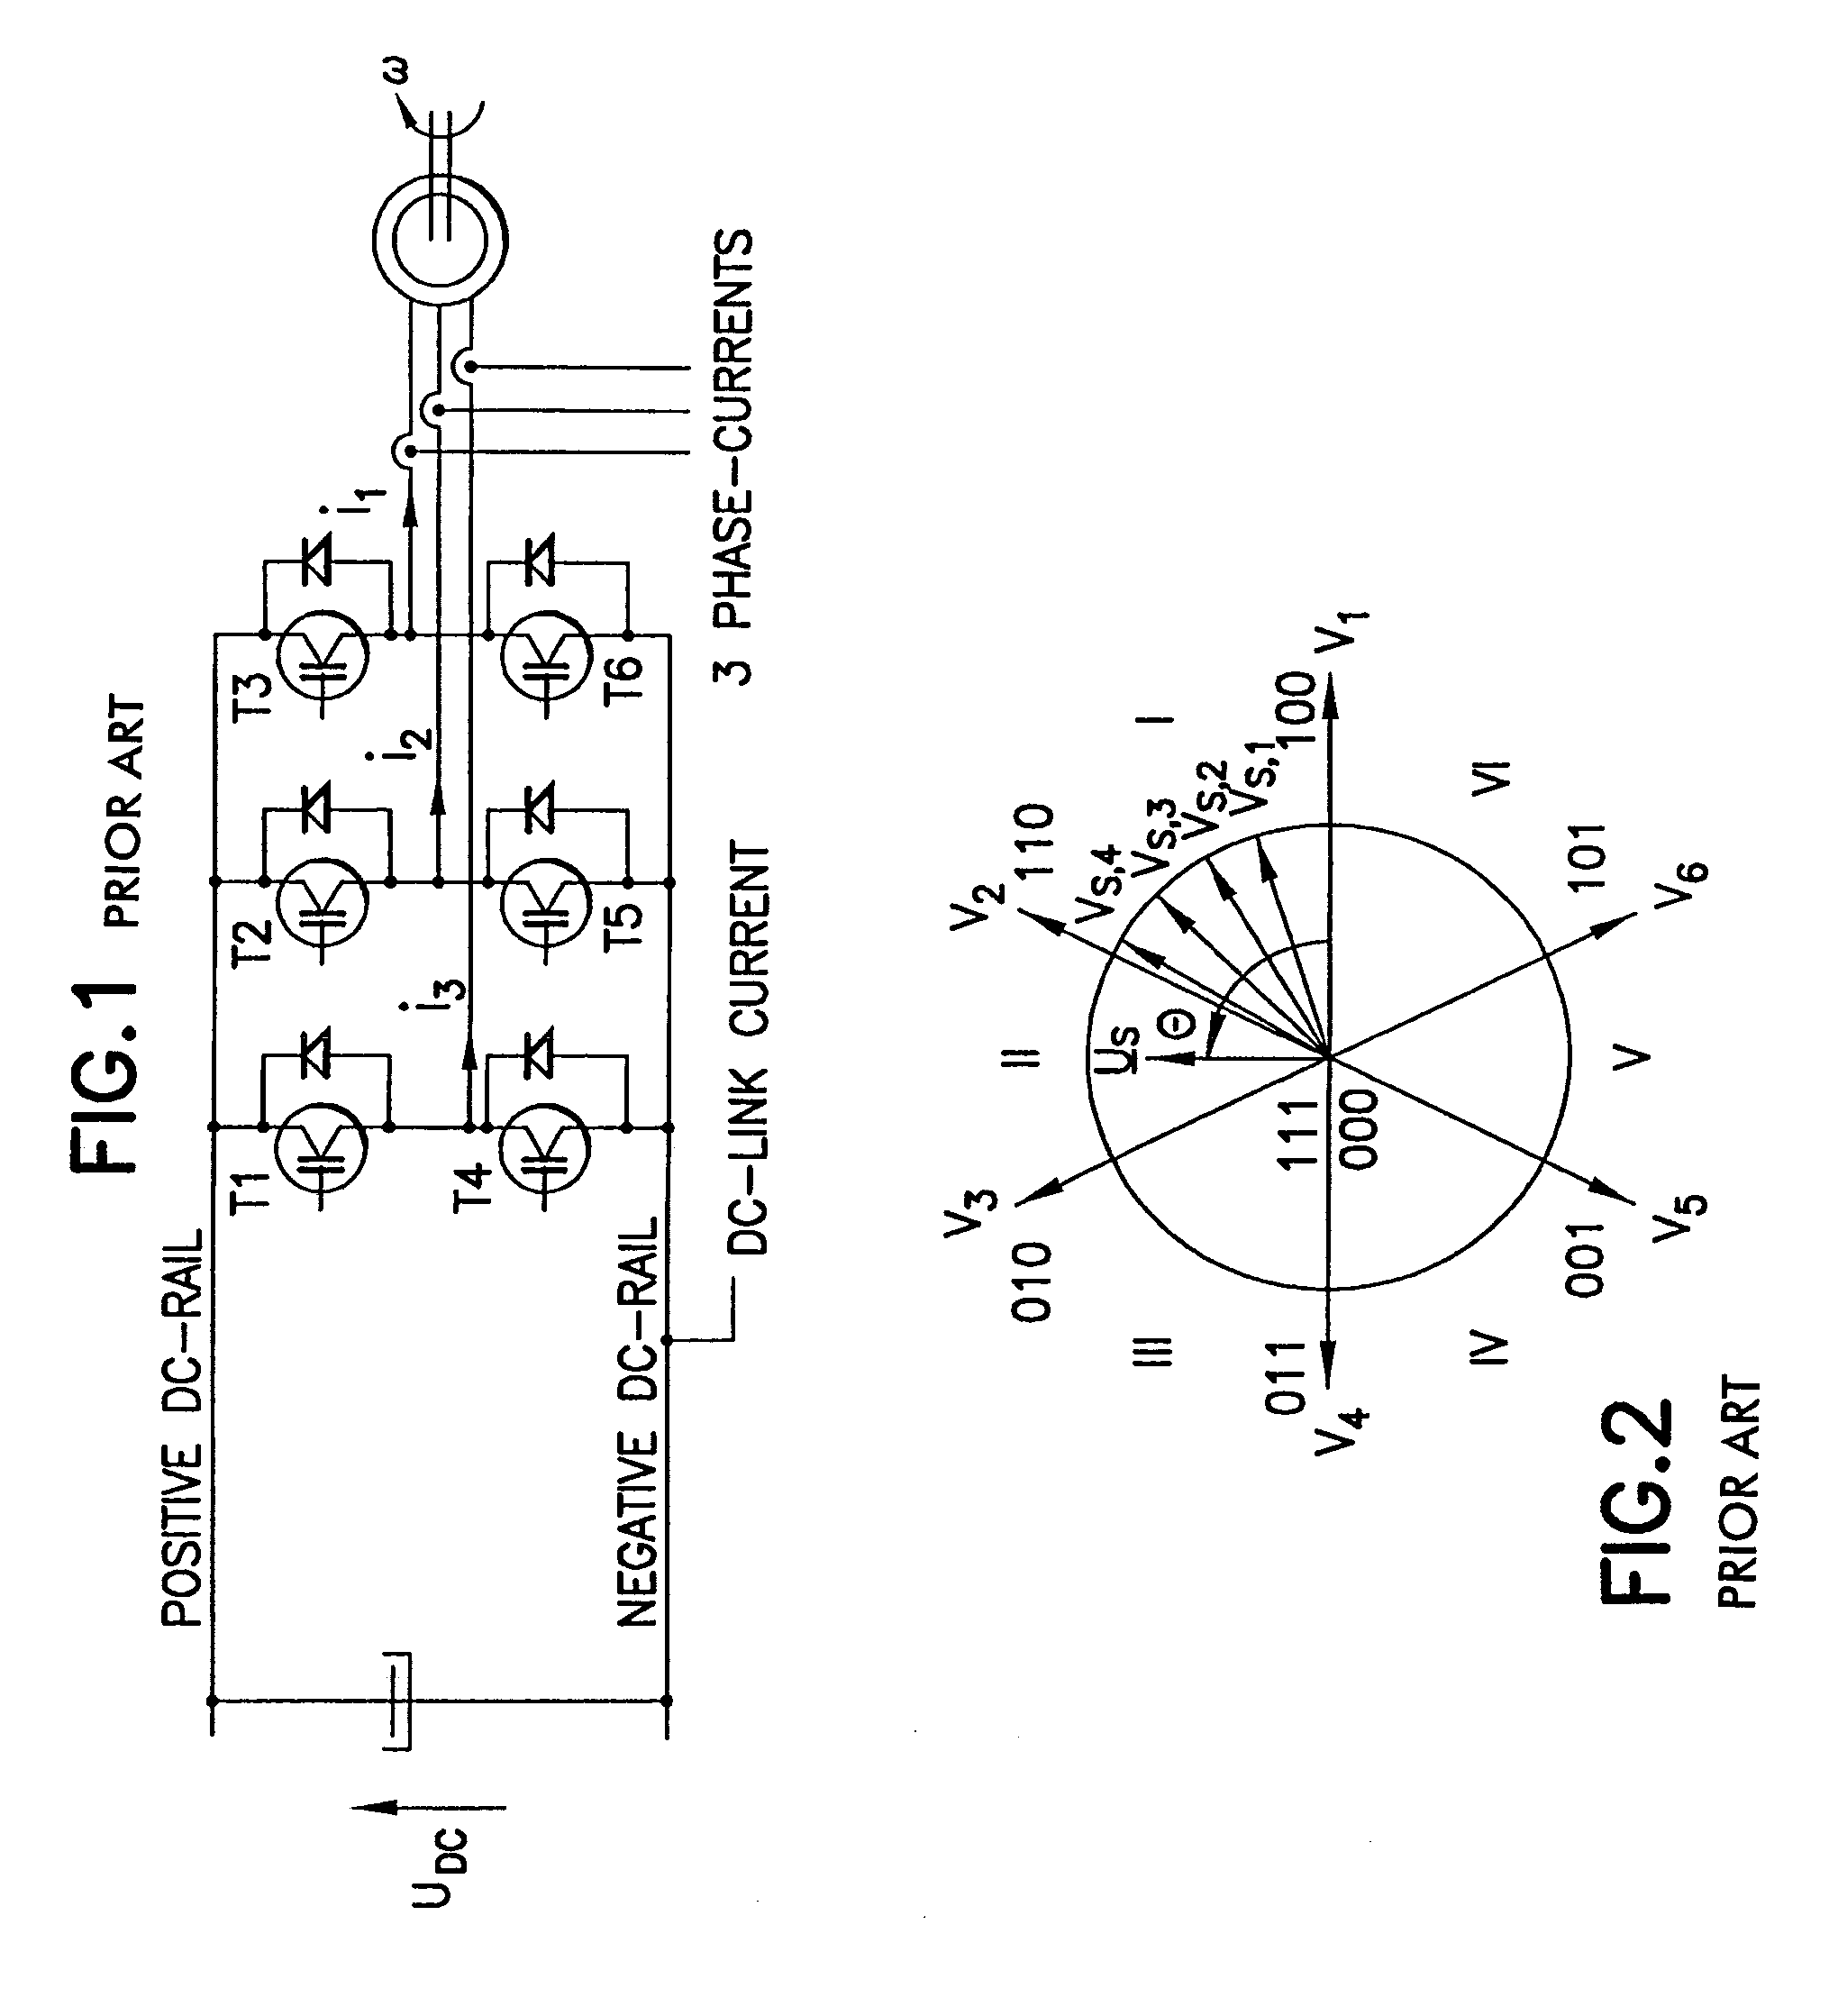 Method and apparatus for reconstructing motor current from DC bus current